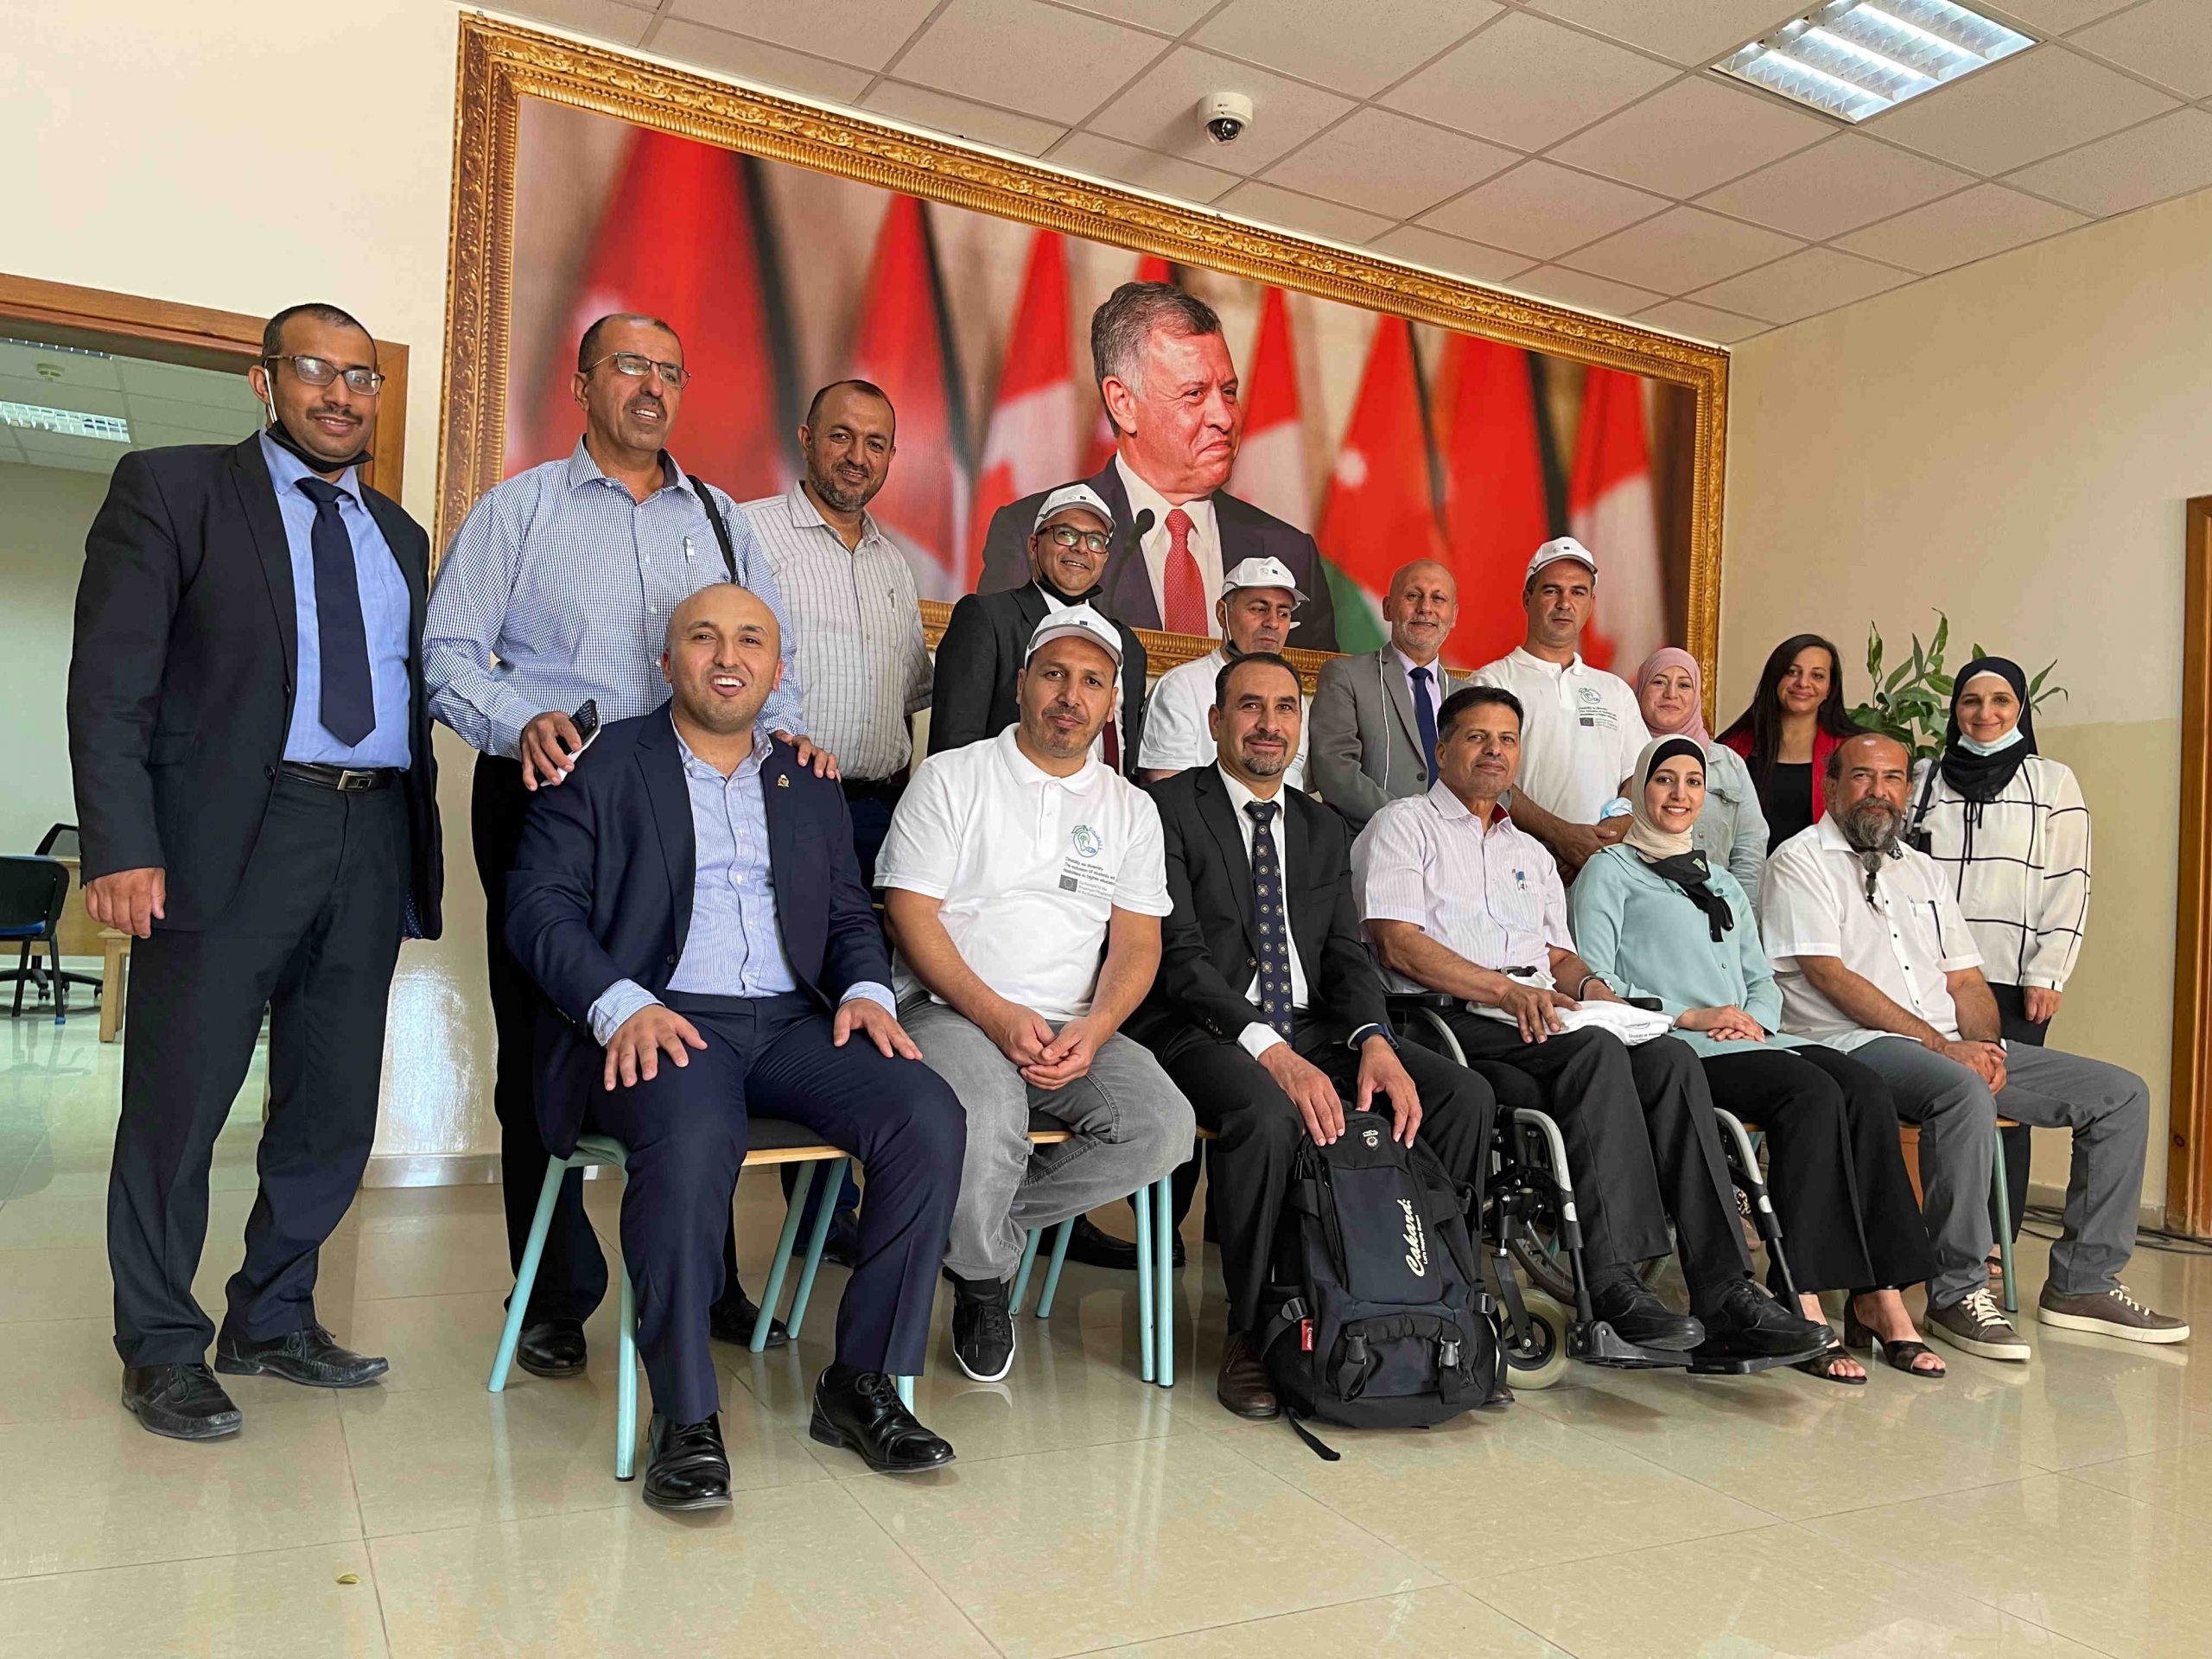 Management Meeting at University of Jordan -Aqaba Group picture with staff close